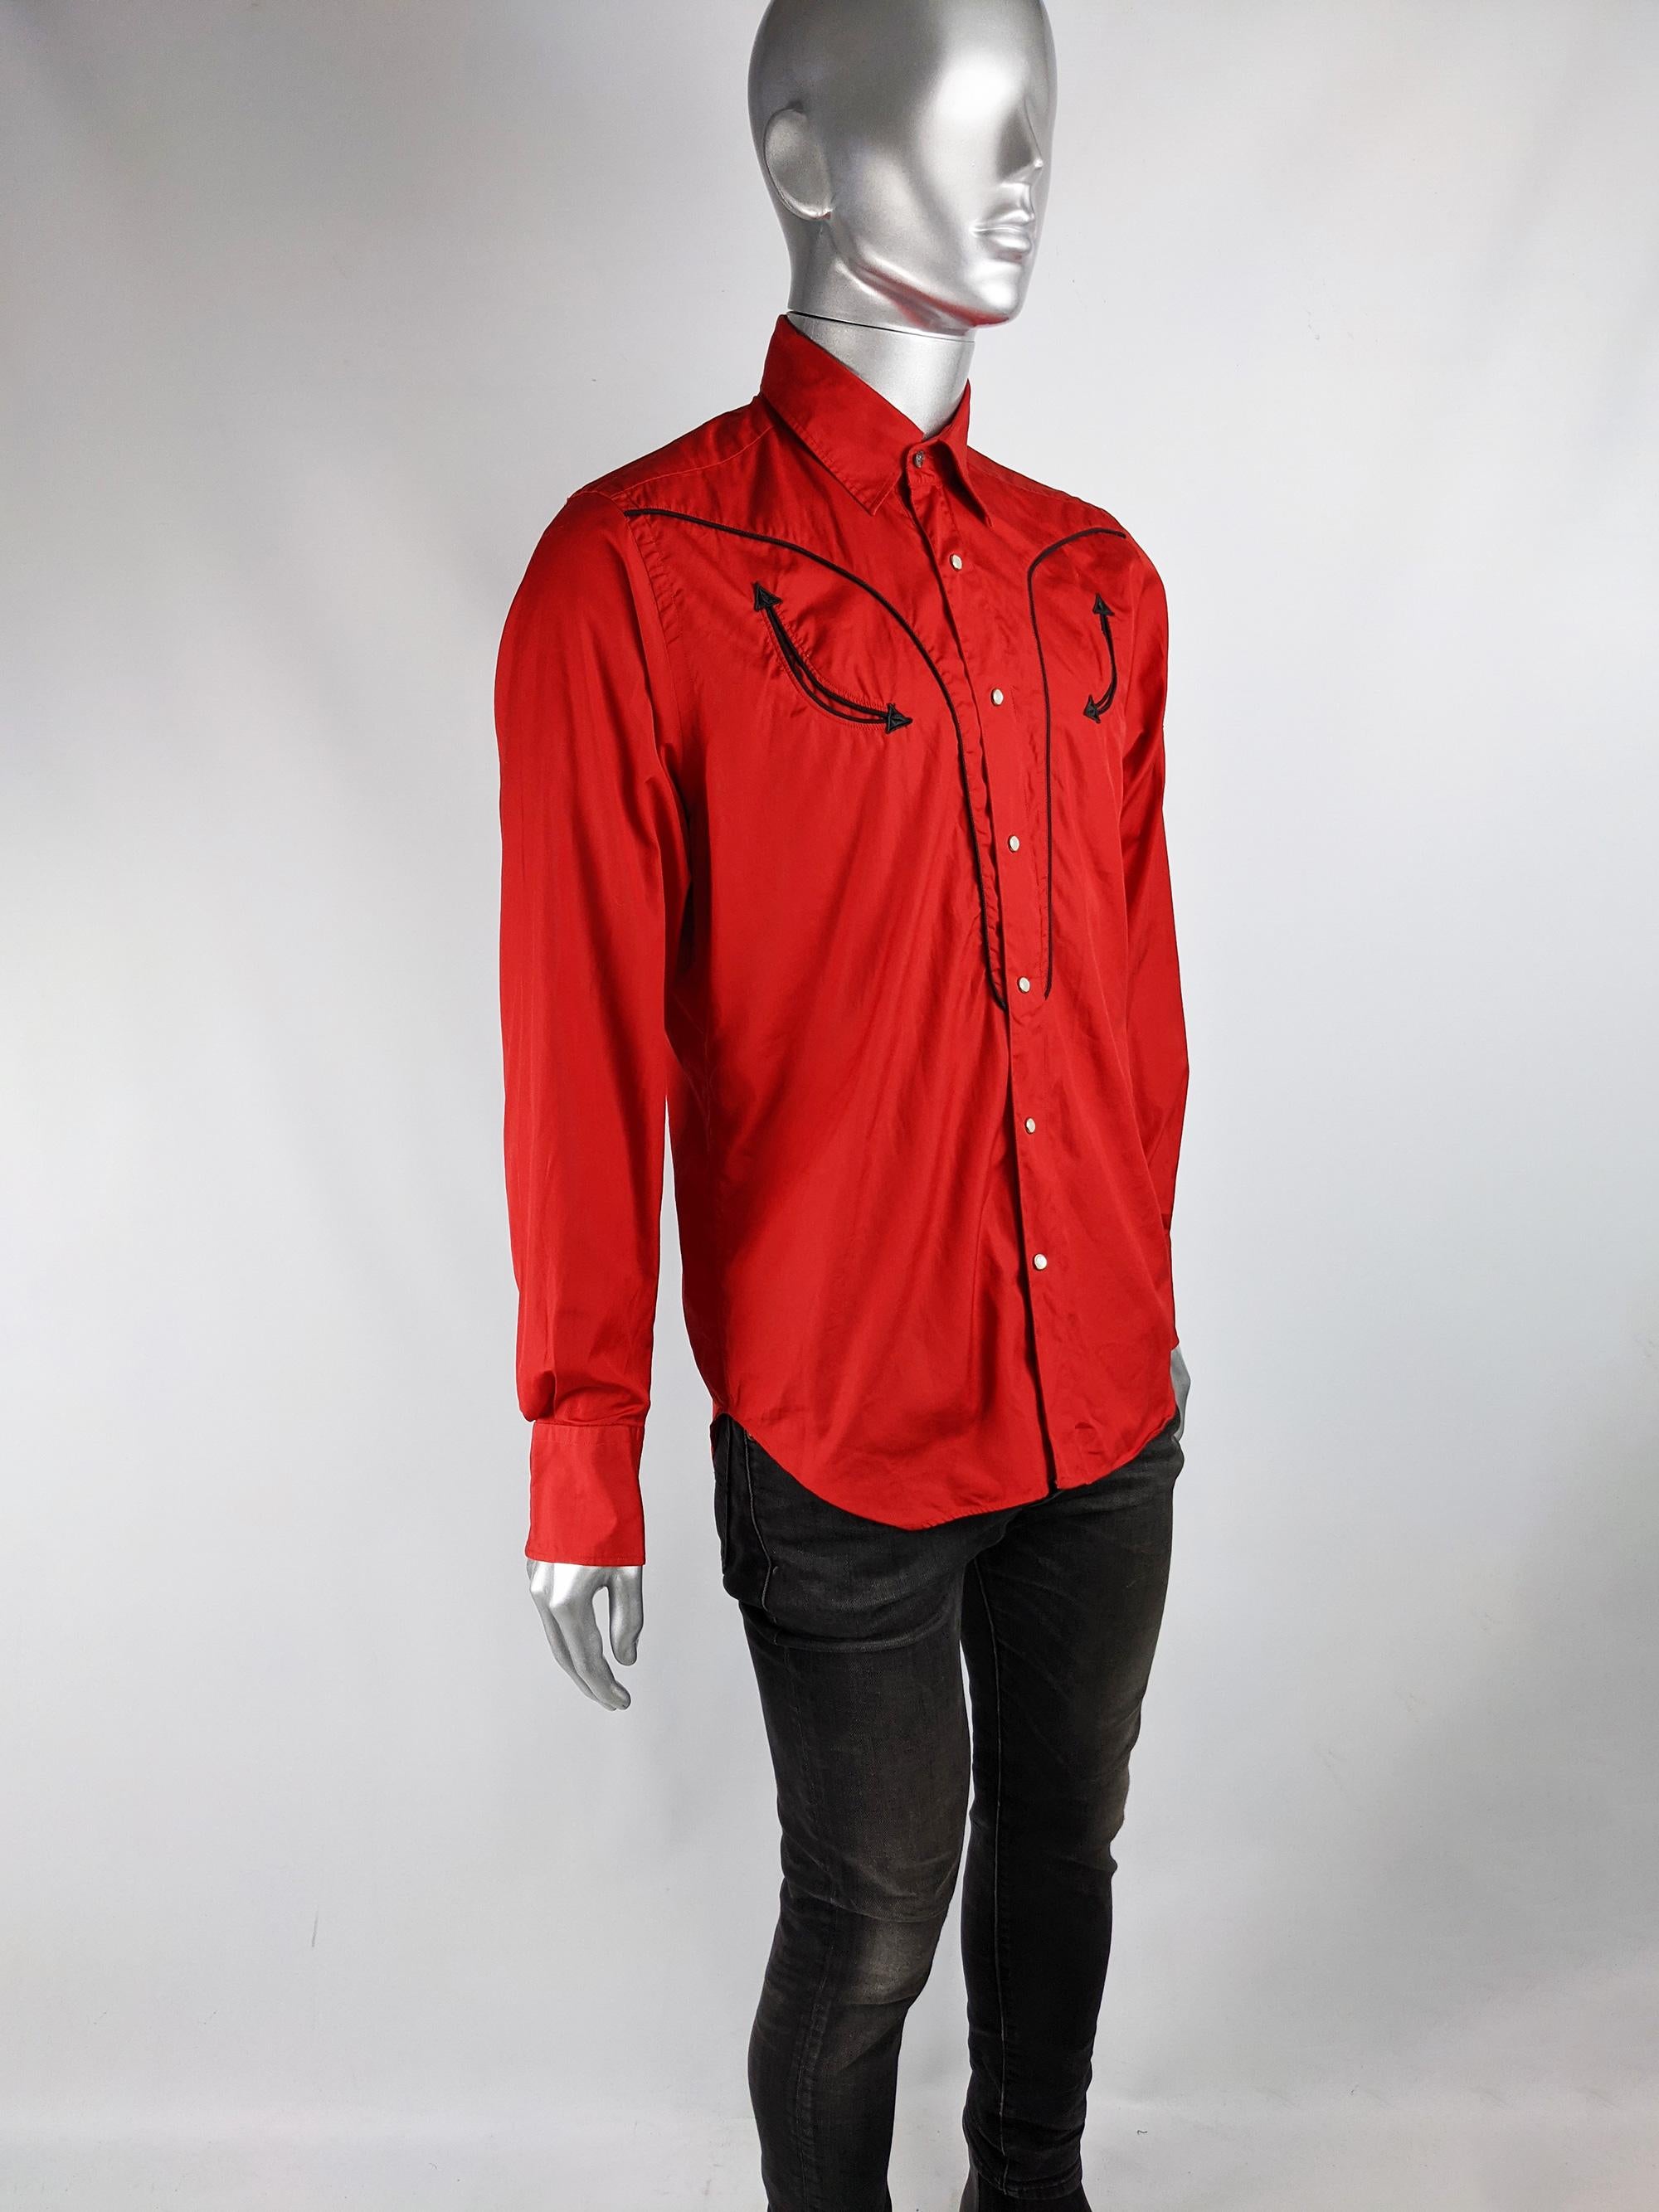 Christian Lacroix Mens Red Western Vintage Shirt In Excellent Condition For Sale In Doncaster, South Yorkshire